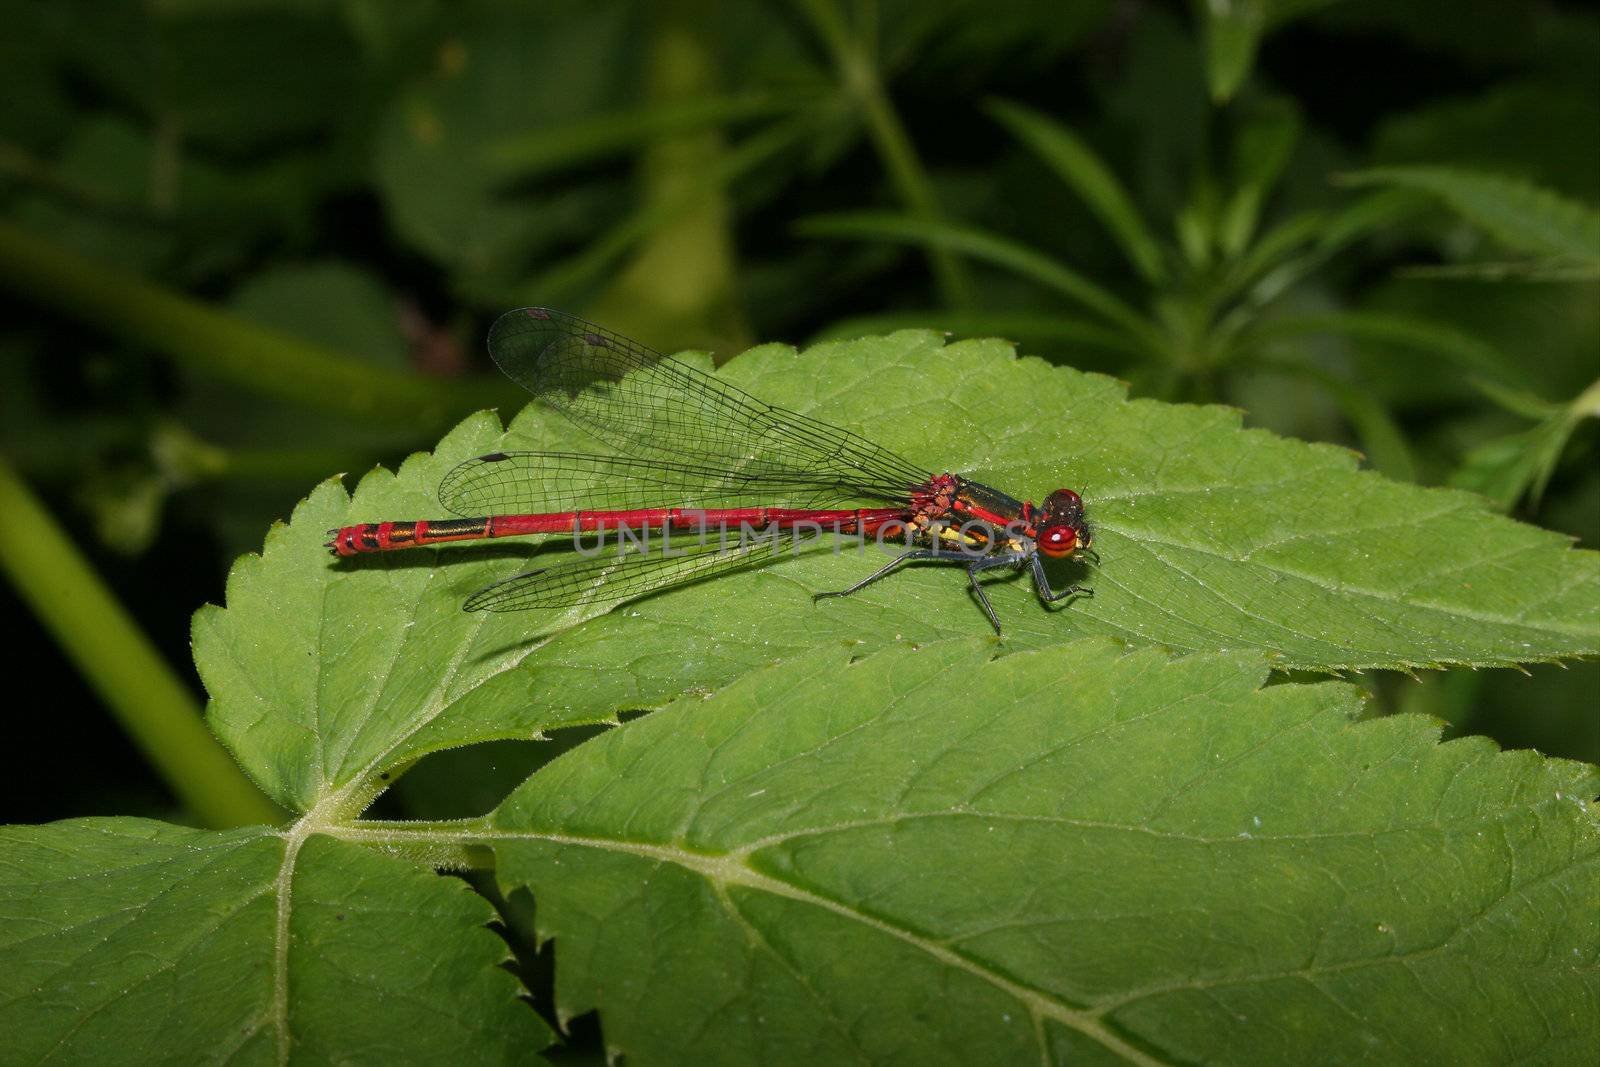 Large Red Damselfly (Pyrrhosoma nymphula) by tdietrich